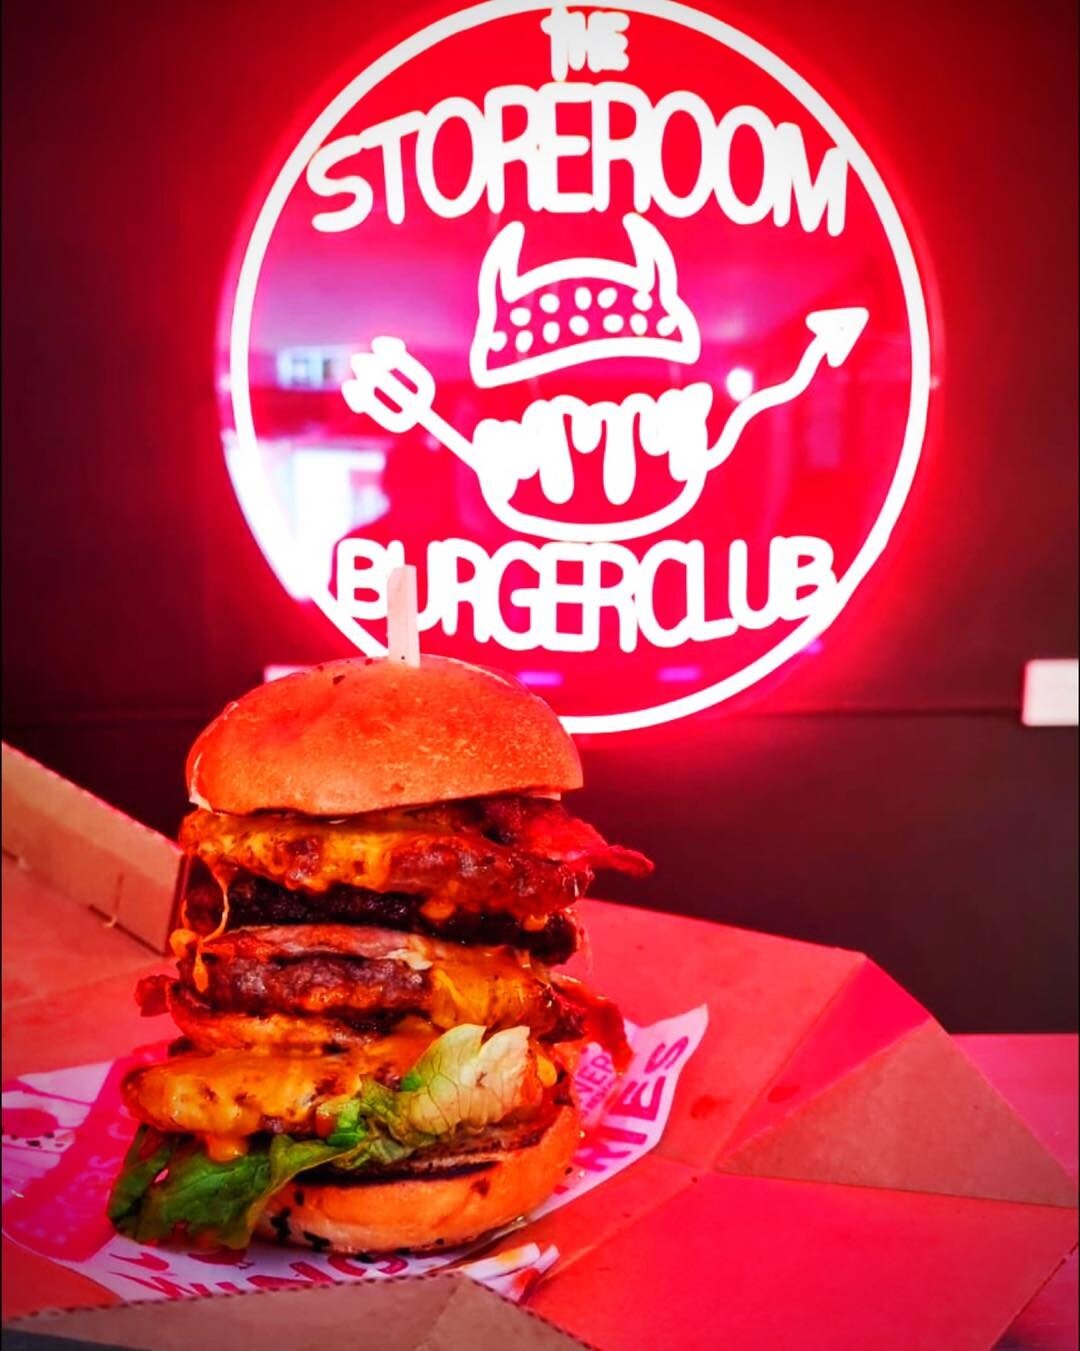 📸 THE TOWER 🍔
.
This absolute ridiculous monstrosity of a burger is available this week only. 4 beef pattys, bacon and cheese. 
.
Orders here 📲👇👇👇
www.storeroomburgers.co.uk